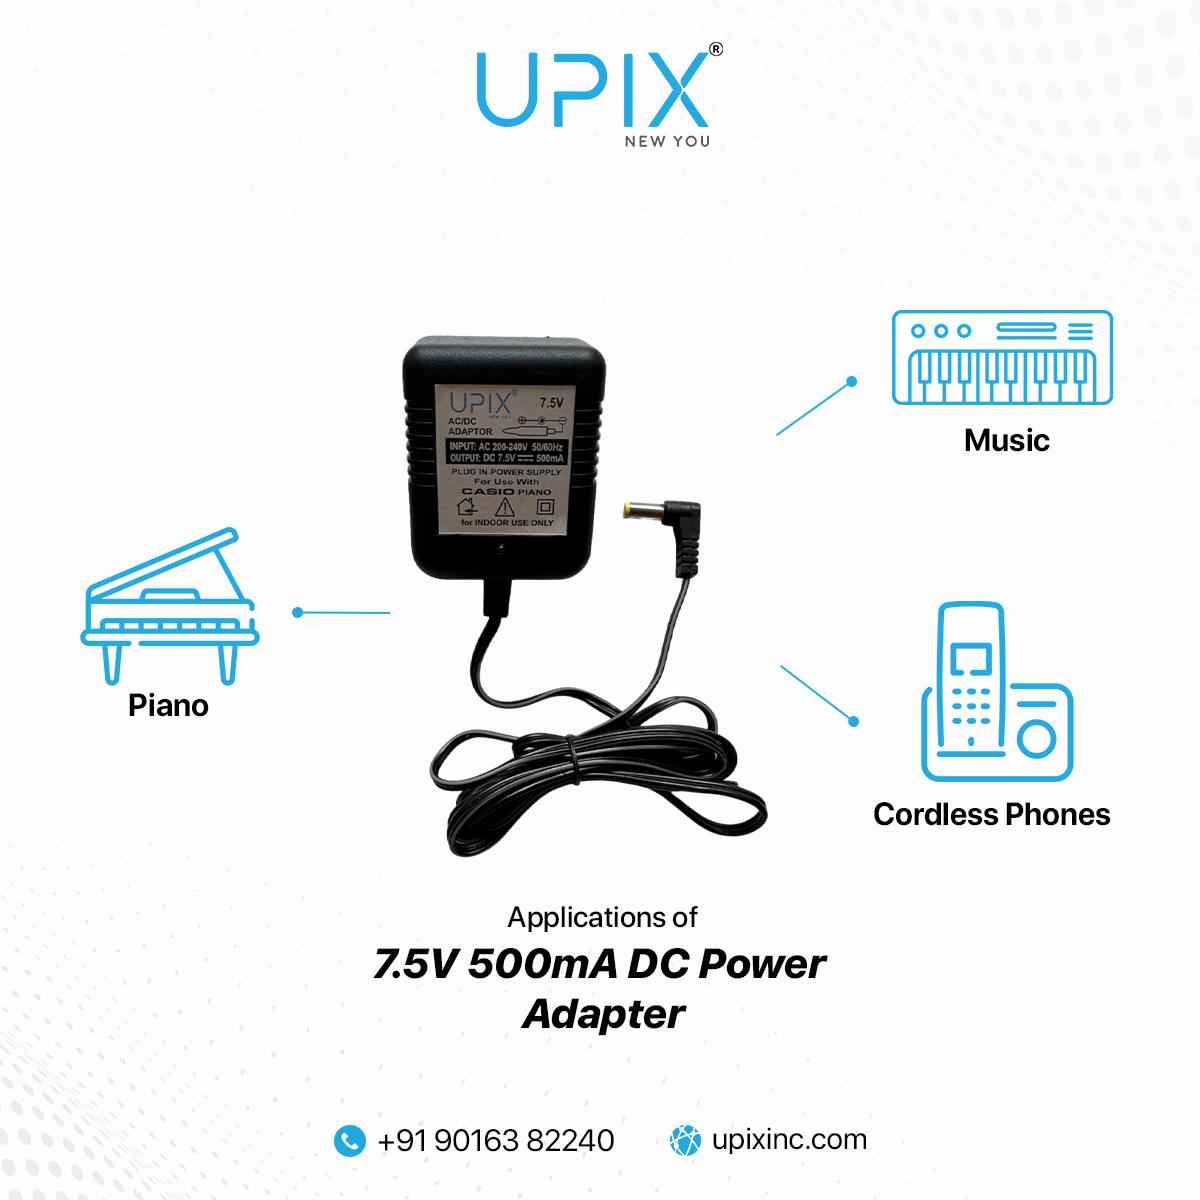 Experience uninterrupted performance with the Upix📷 7.5V 500mA DC Power Adapter. Your devices deserve the best, and we deliver excellence every time!
.
To know more, visit- upixinc.com or WhatsApp Now wa.me/919016382240
.
#upixinc #PowerWithPeaceOfMind #supplier